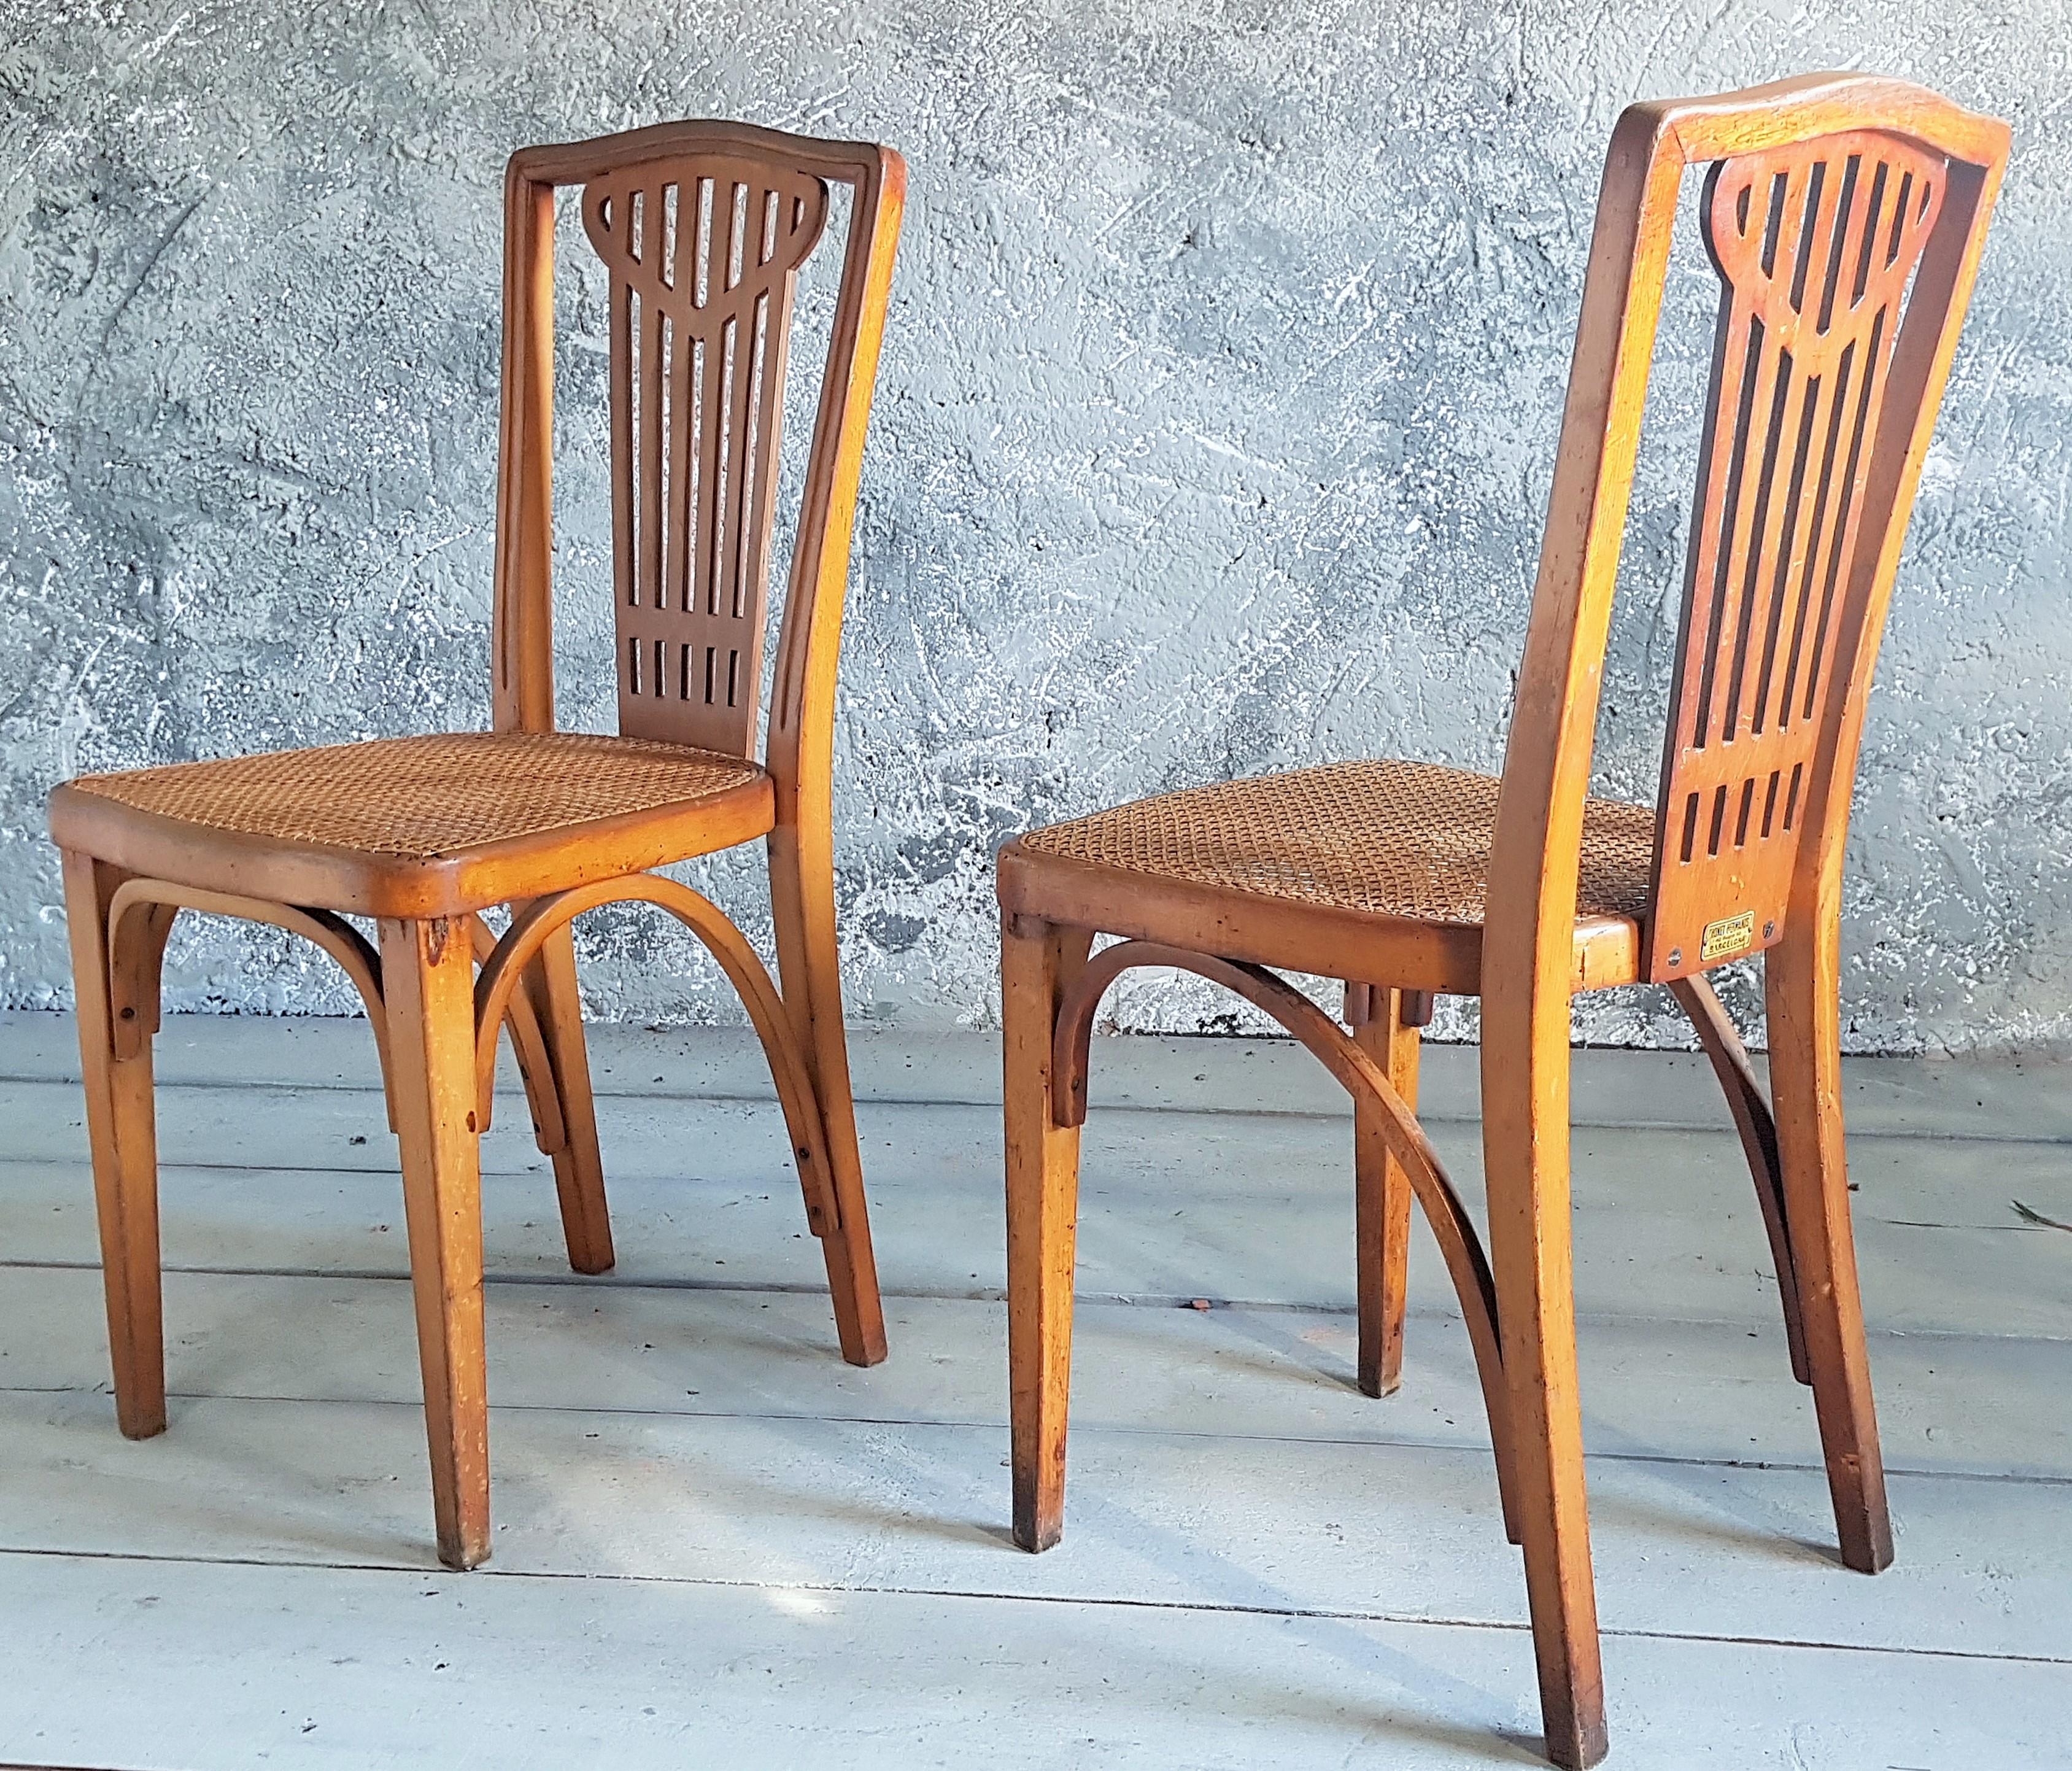 Arts and Craft Art Nouveau Set of 8 Bentwood Chairs Signed Thonet, 1900 In Good Condition For Sale In Saarbruecken, DE